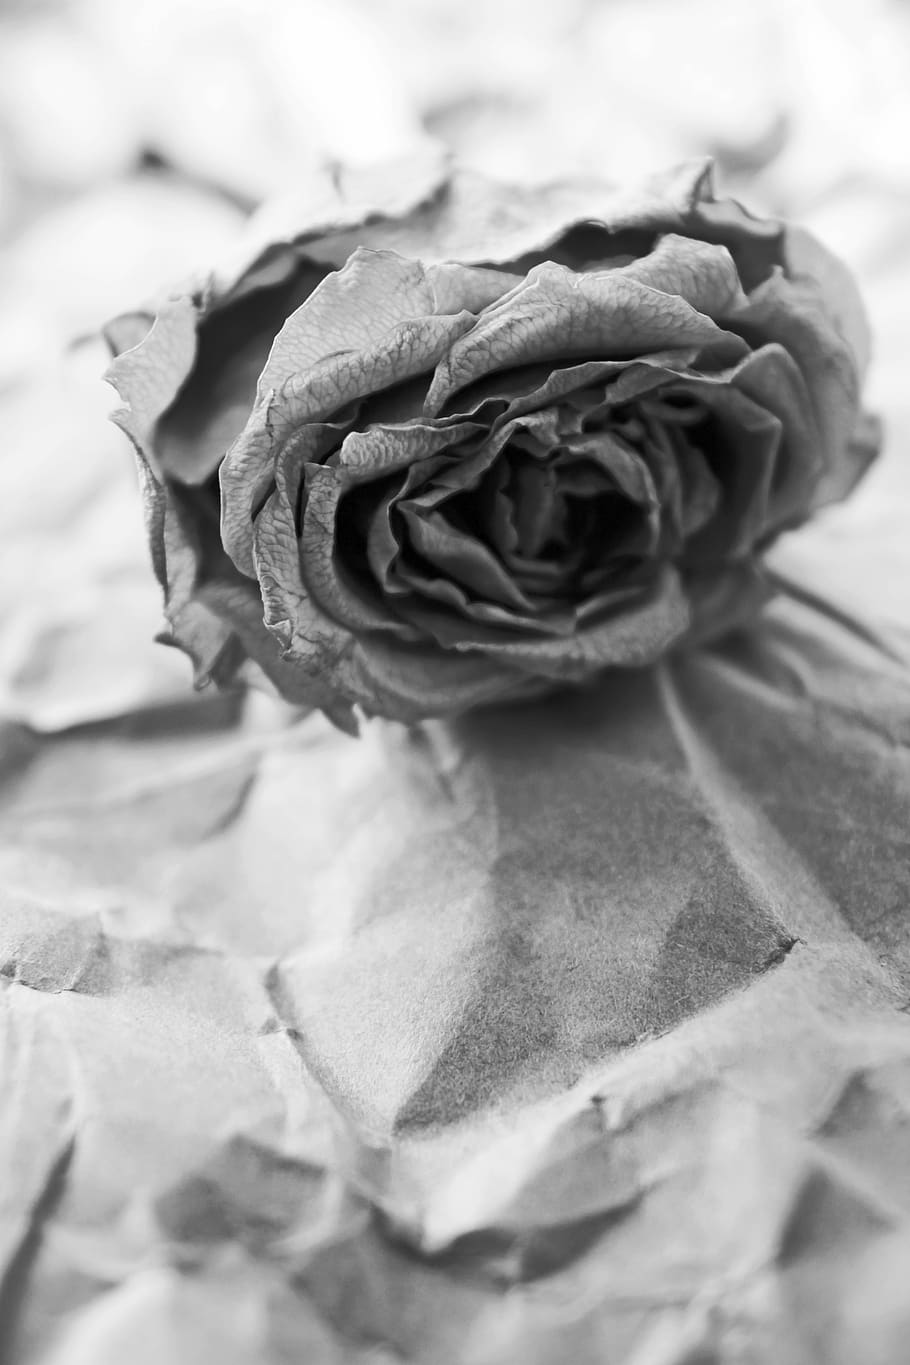 wilted, faded, fading, fade, dried, dry, dead, rose, flower, romantic